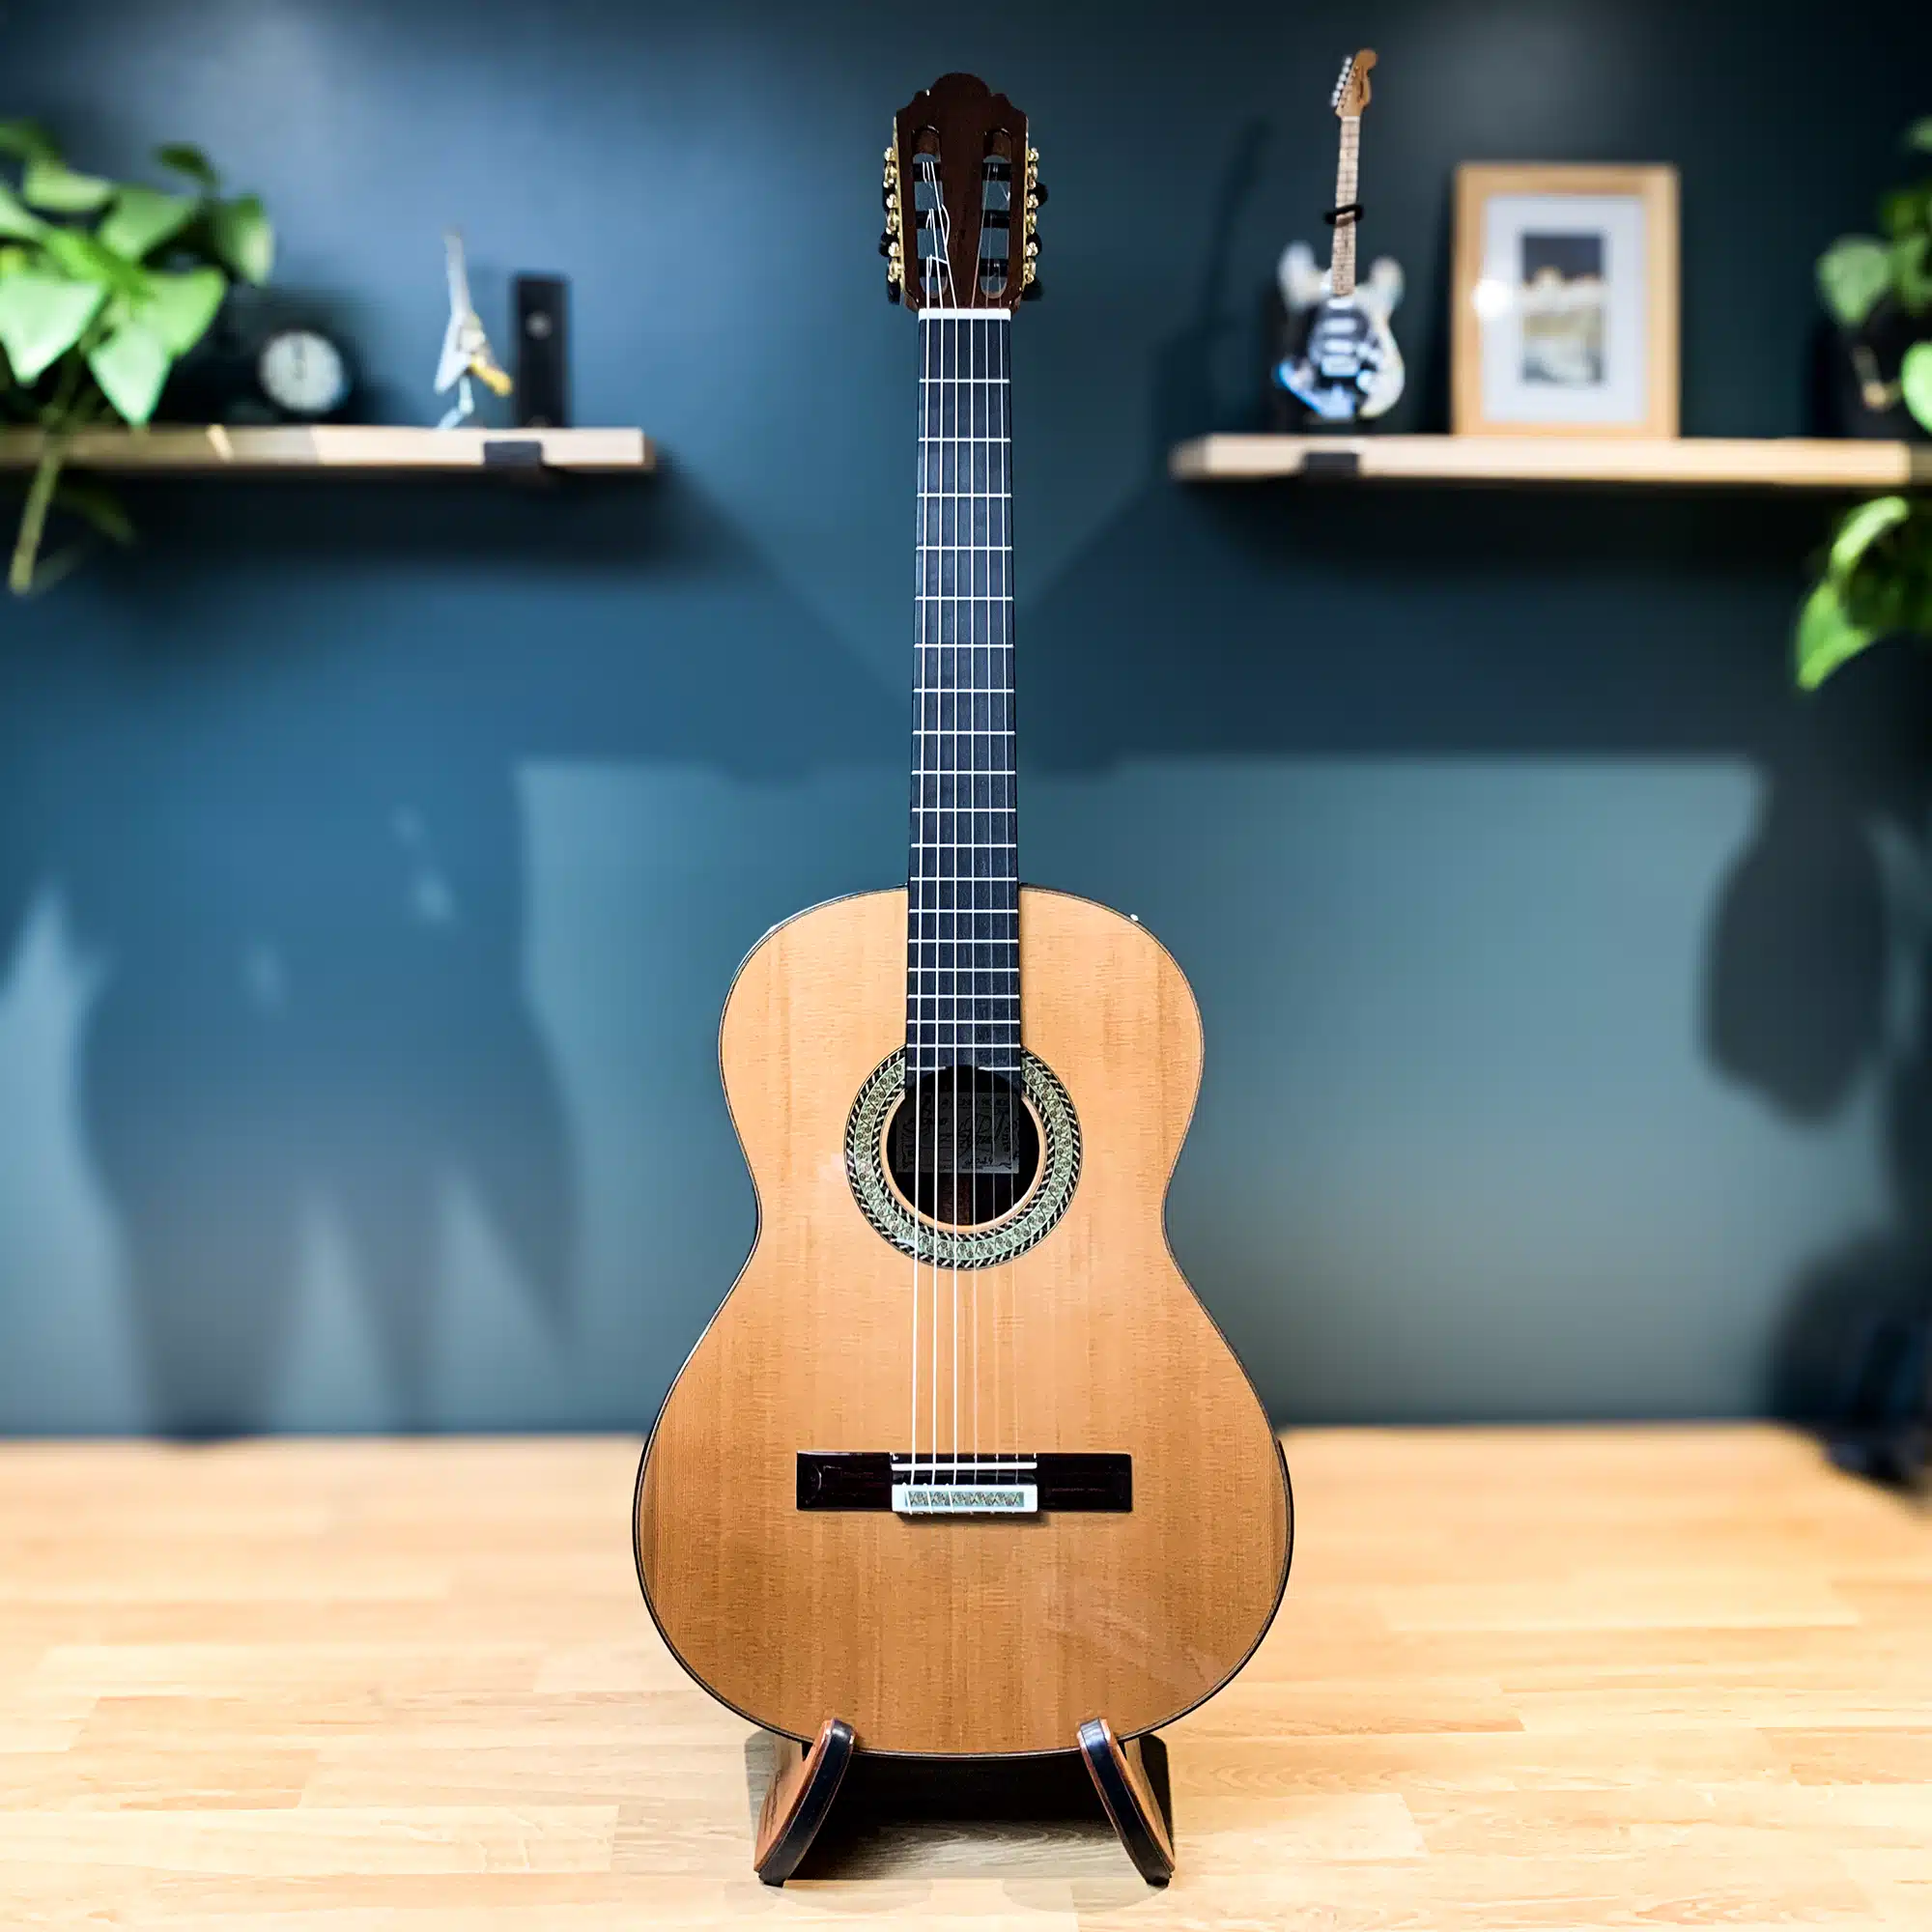 How much should you spend on a classical guitar